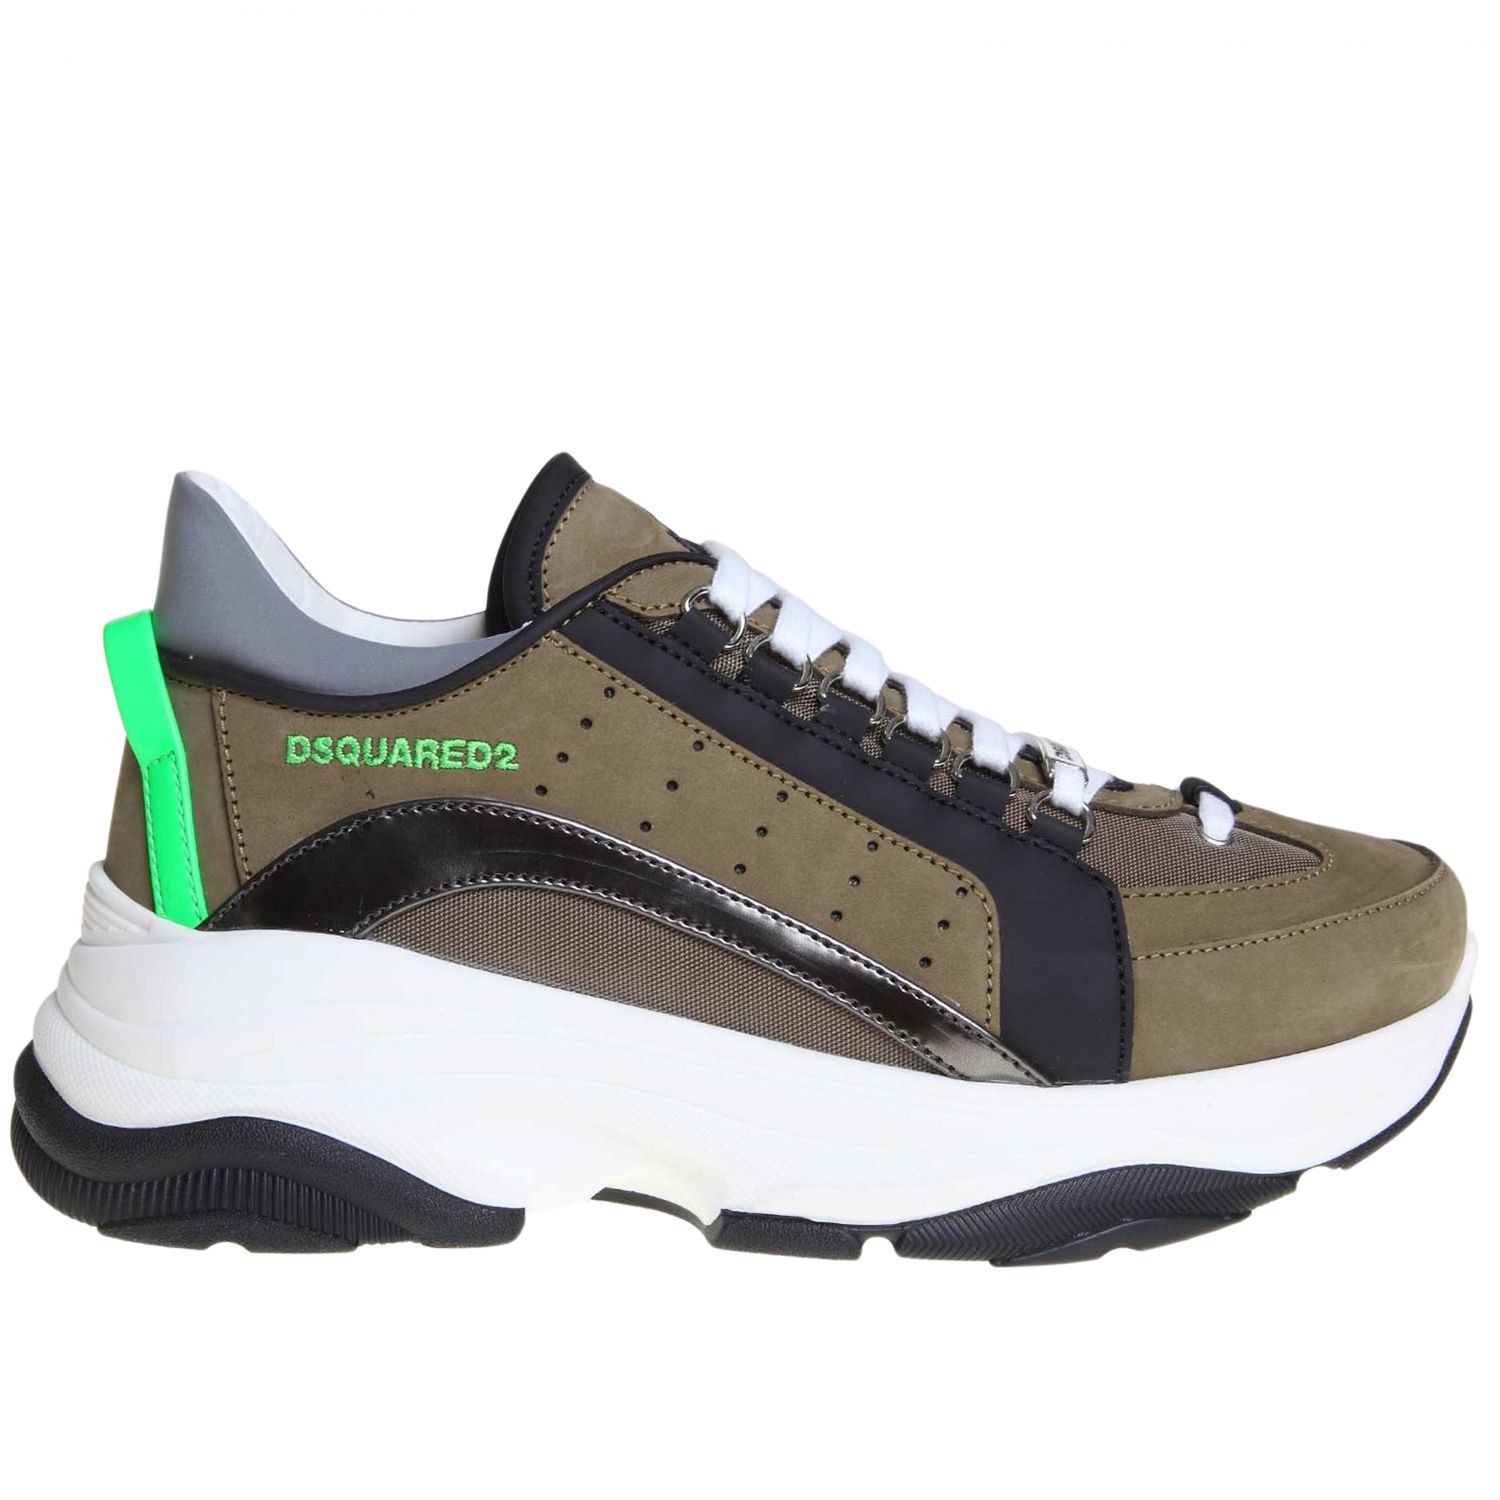 Dsquared2 Outlet: Trainers men - Charcoal | Trainers Dsquared2 ...